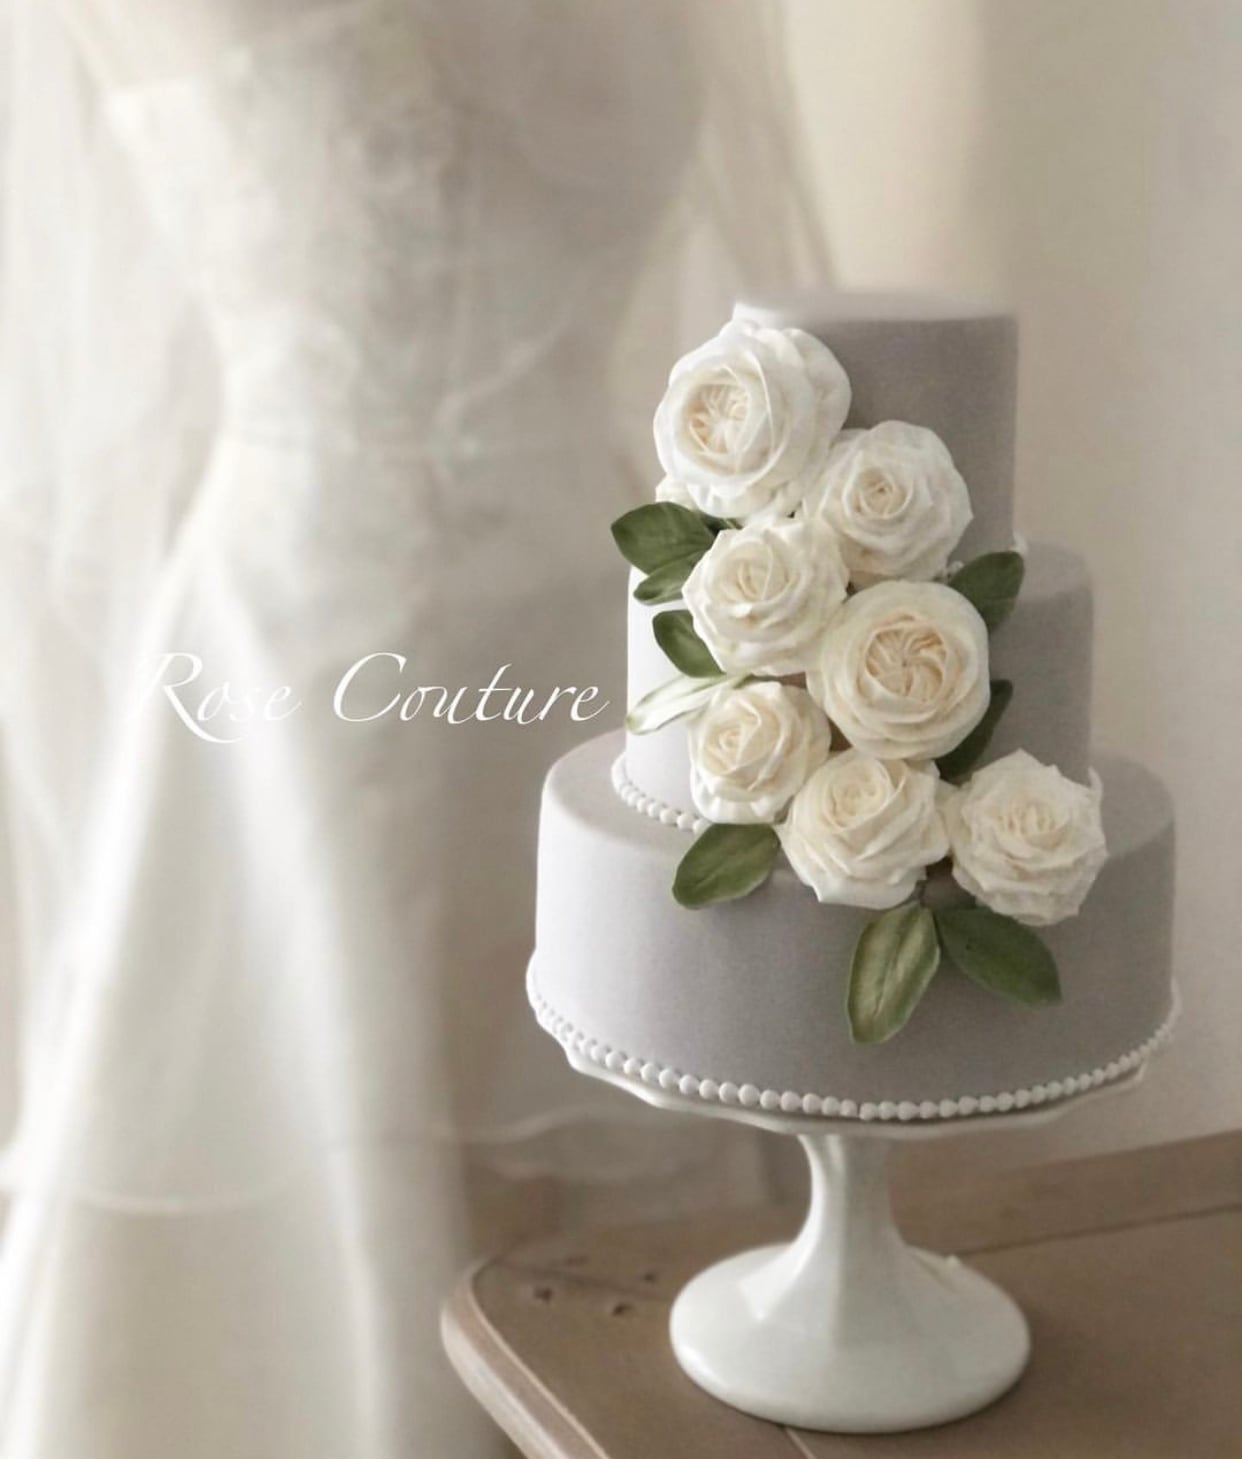 Rose  Couture clay cake  shop